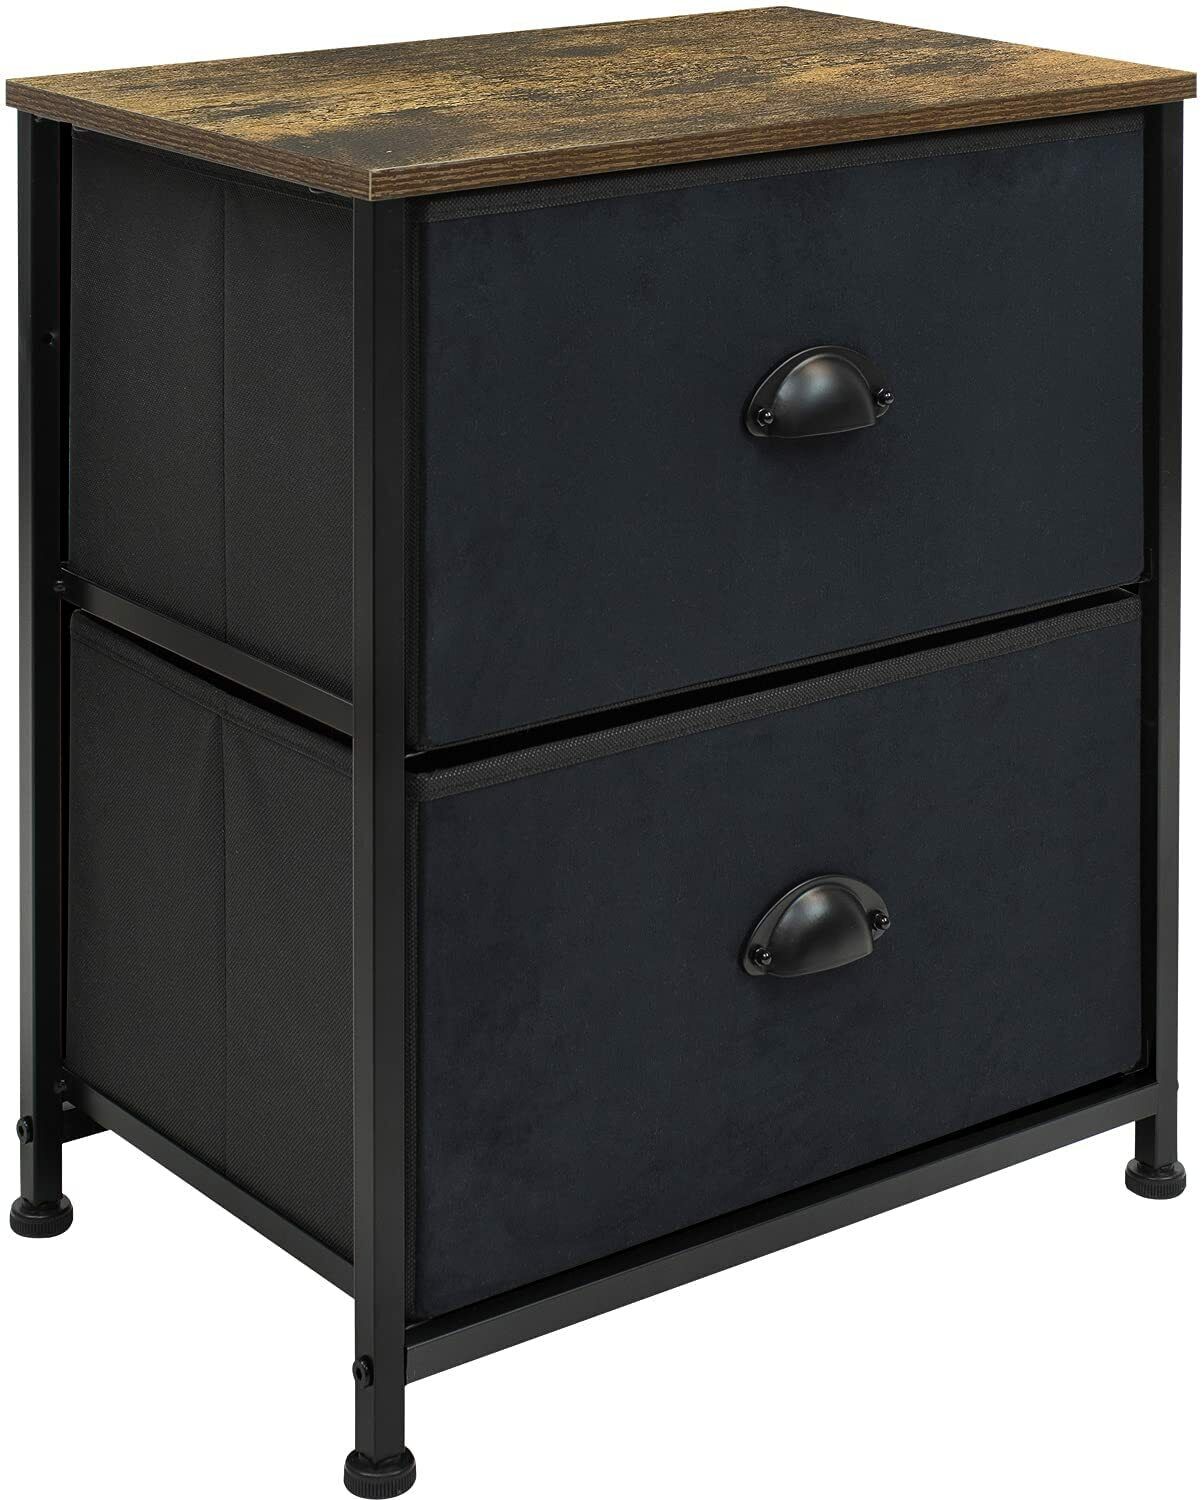 Bedside Night Table w 2 Drawers, Small Dresser for Bedroom, Wood Farmhouse Style